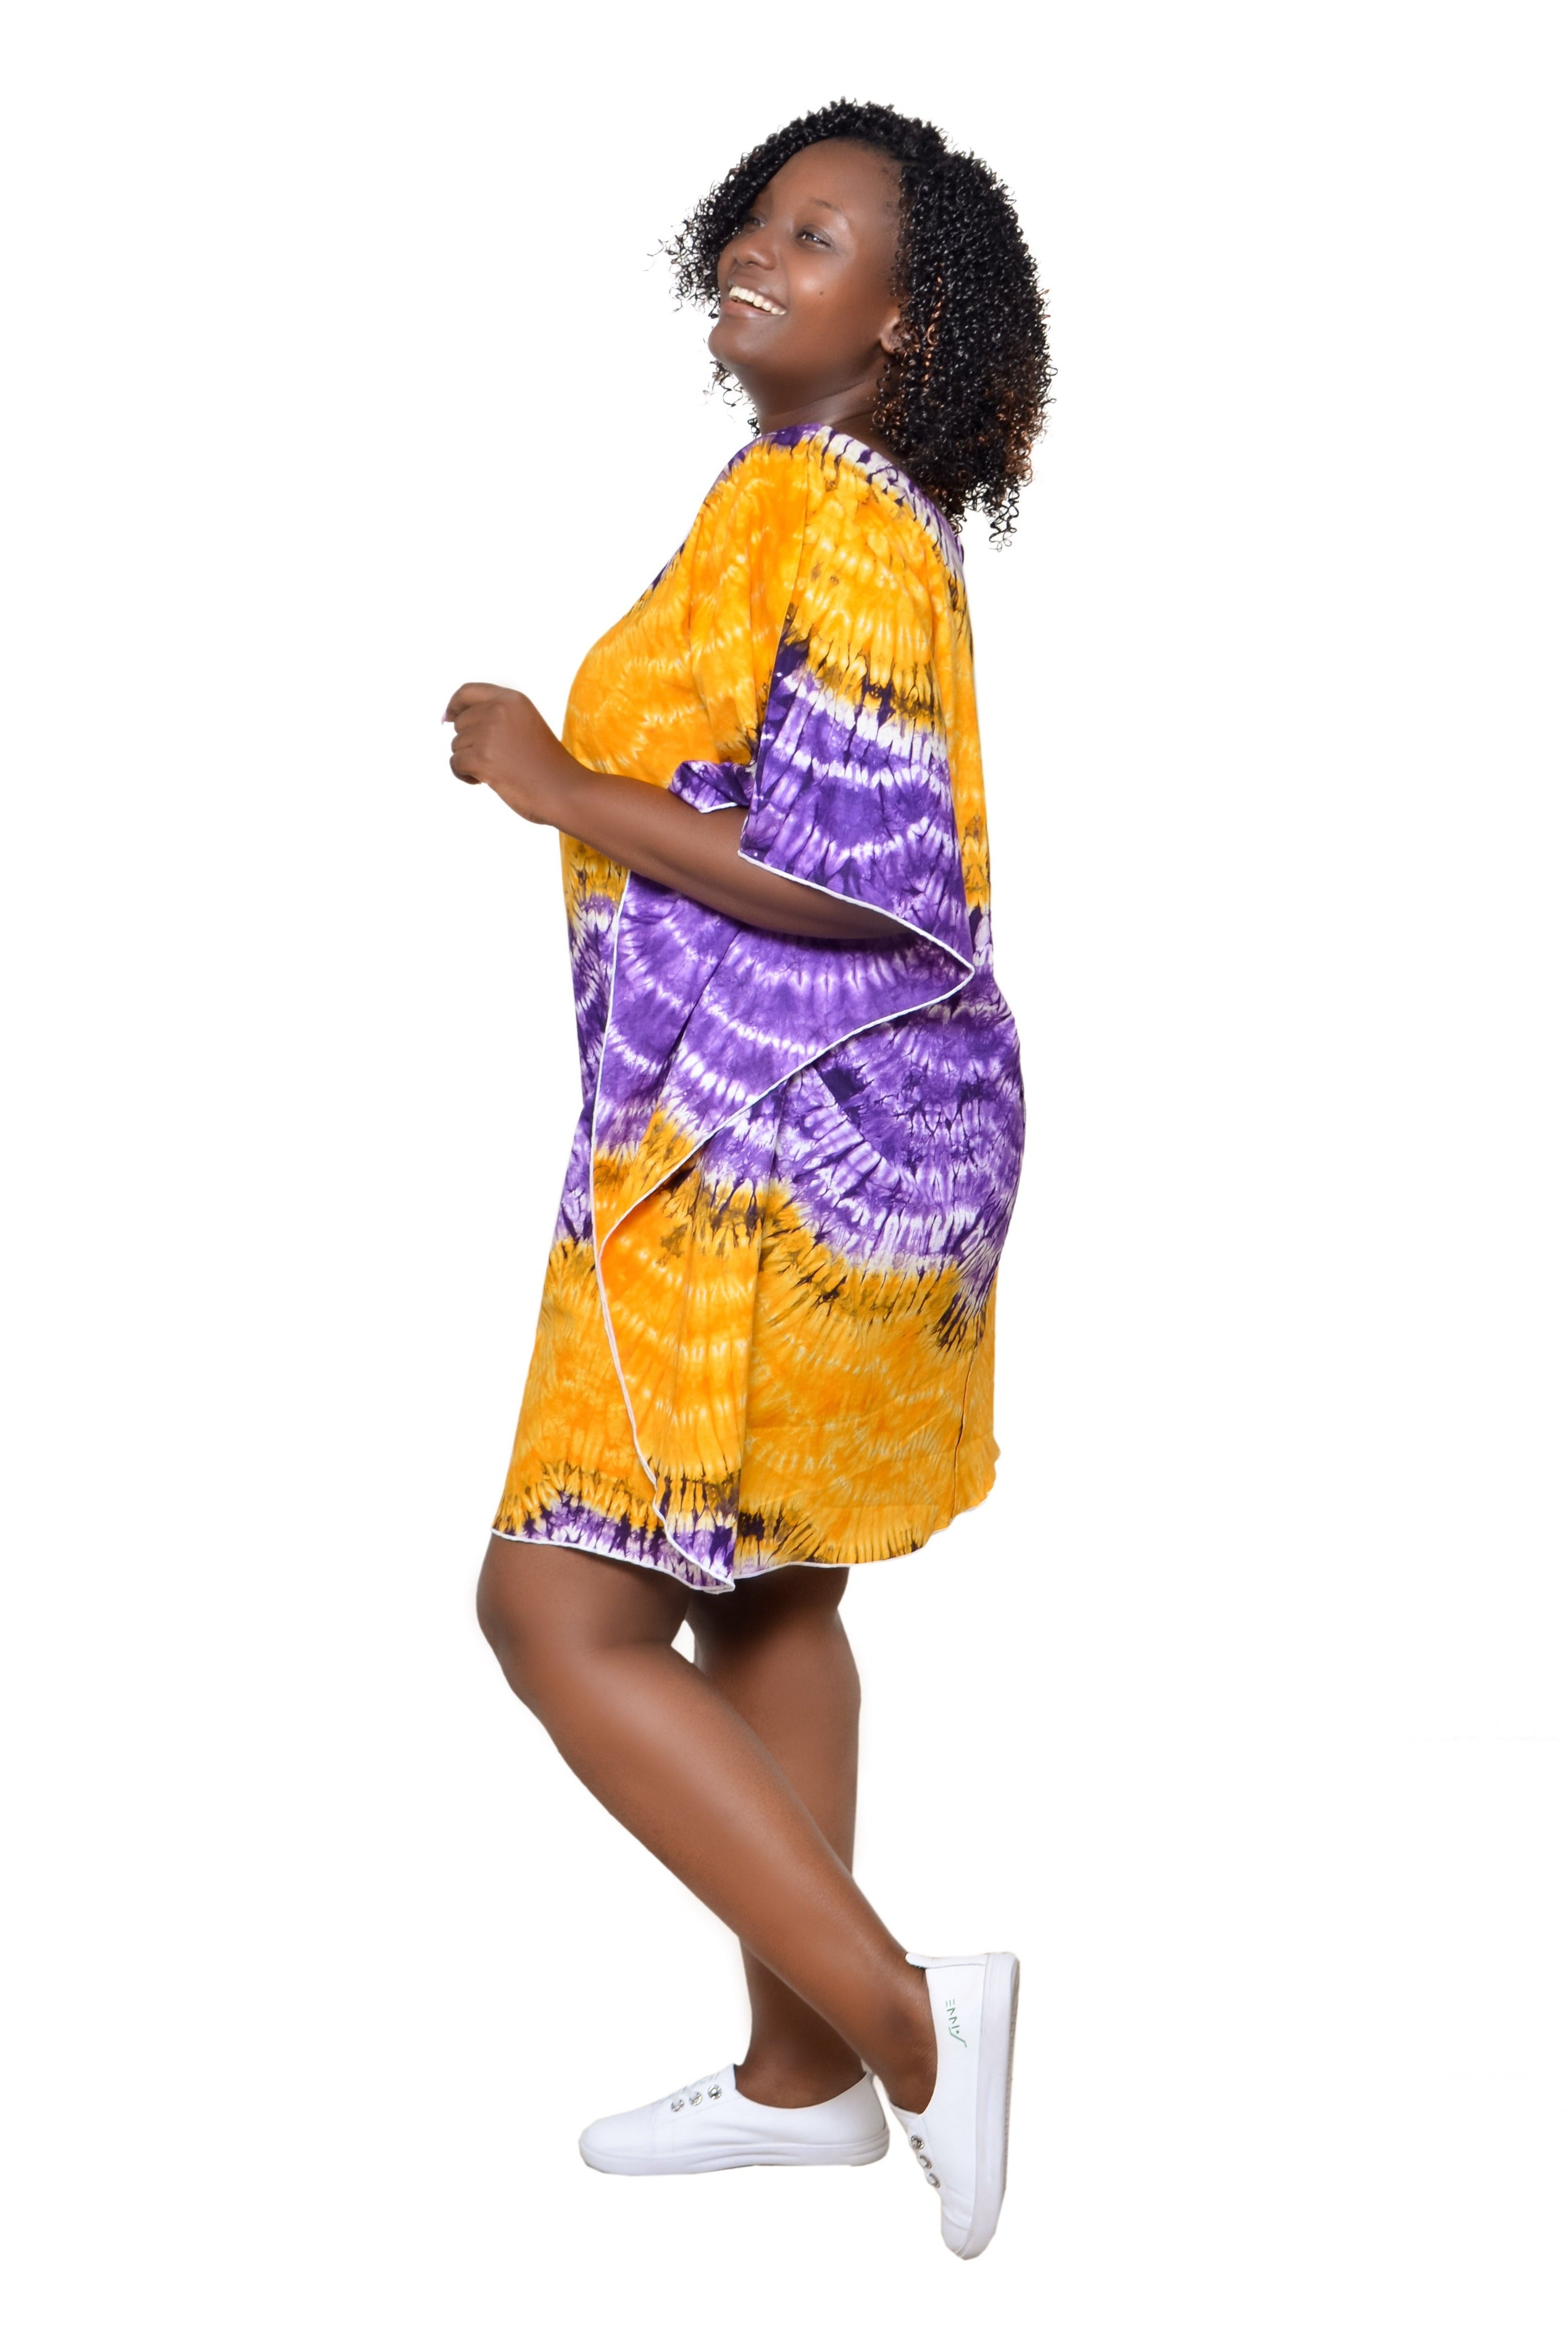 Penina Colorful and Vibrant African Dress Perfect that will delight for Any Occasion